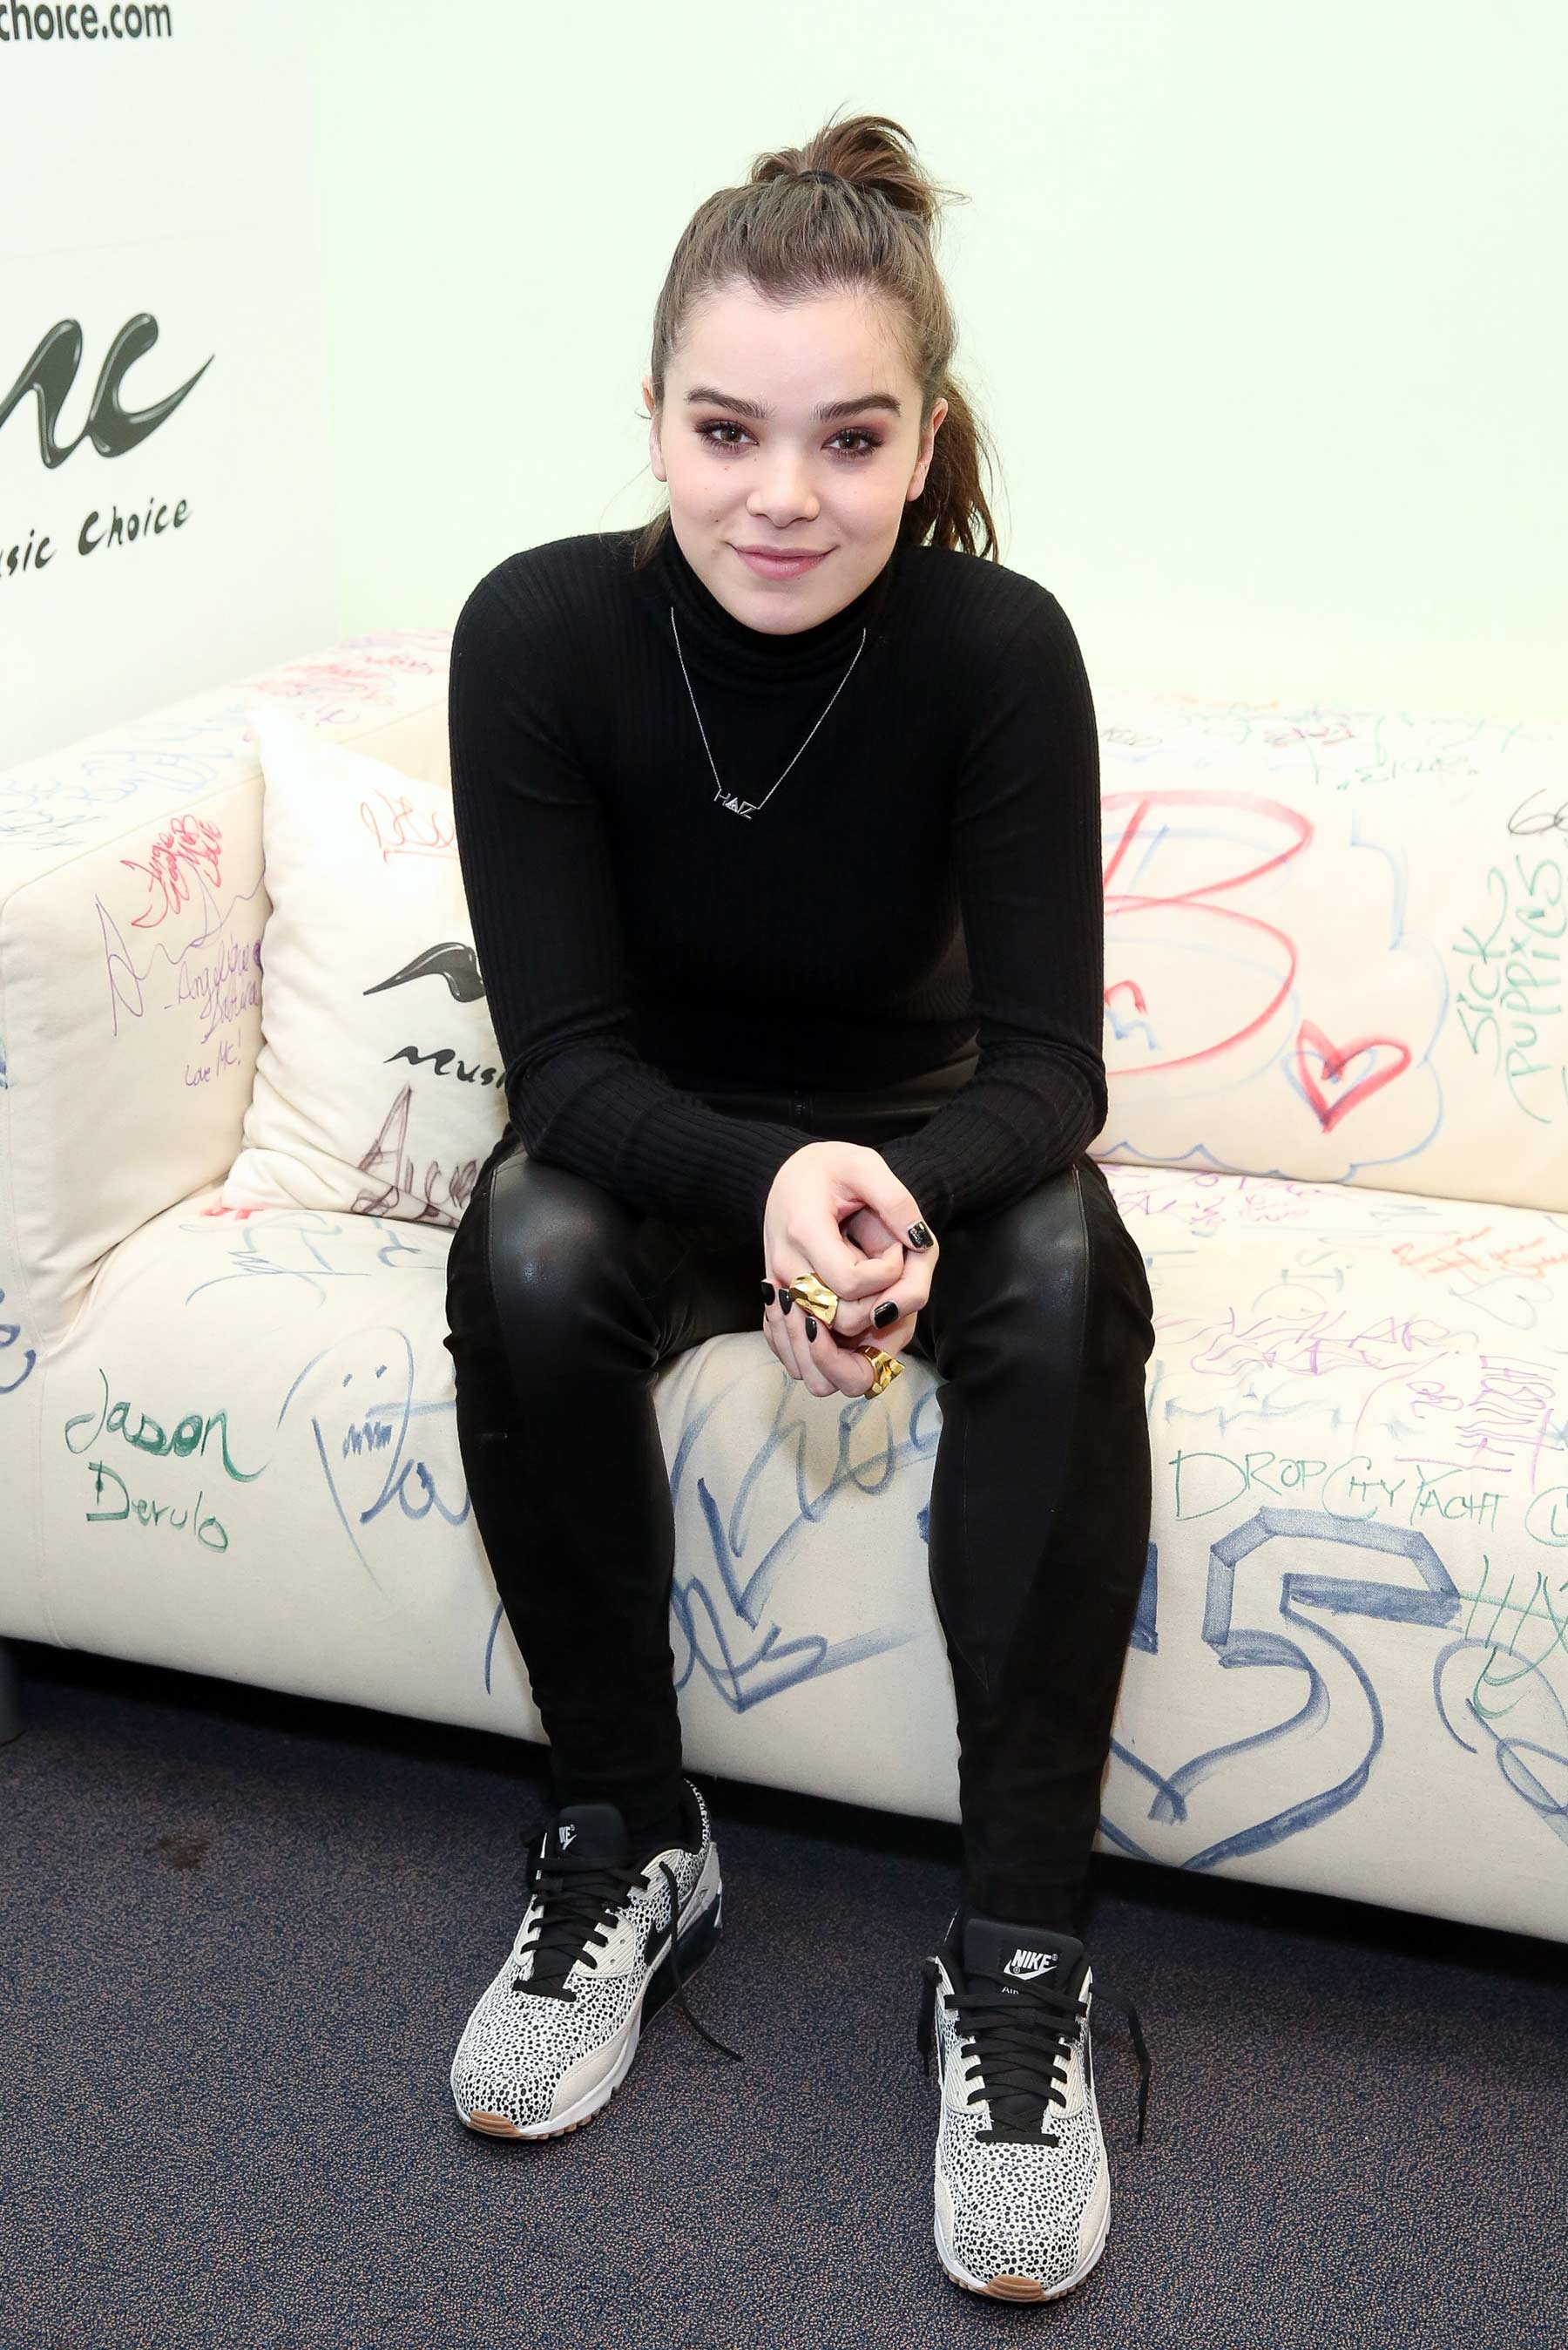 Hailee Steinfeld at Music Choice in New York